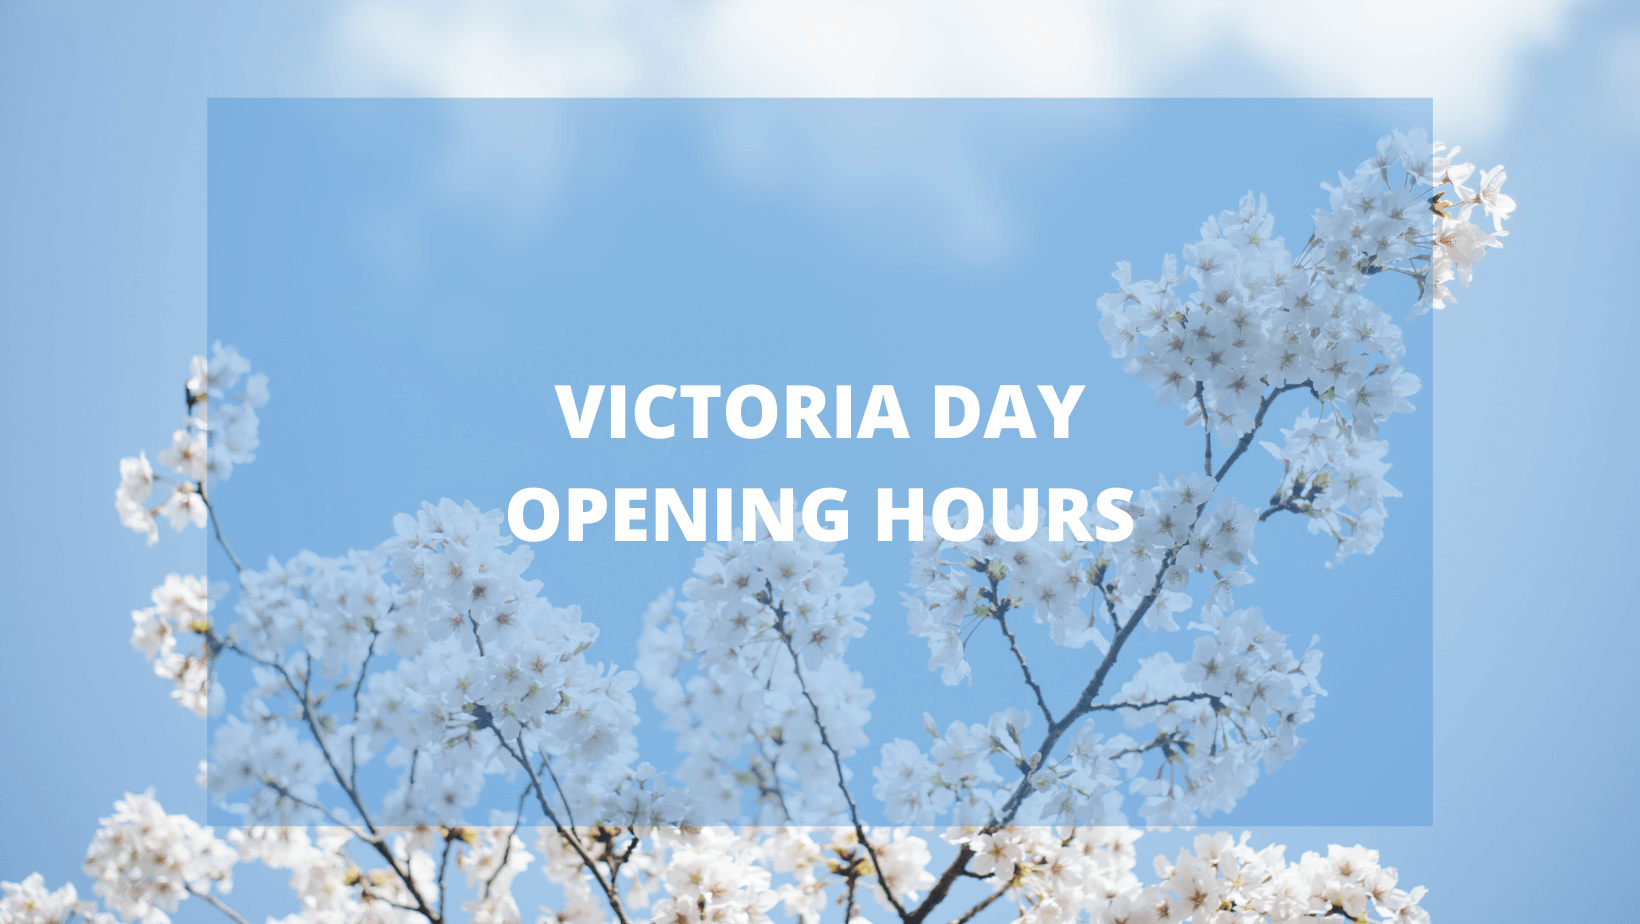 Victoria Day opening hours